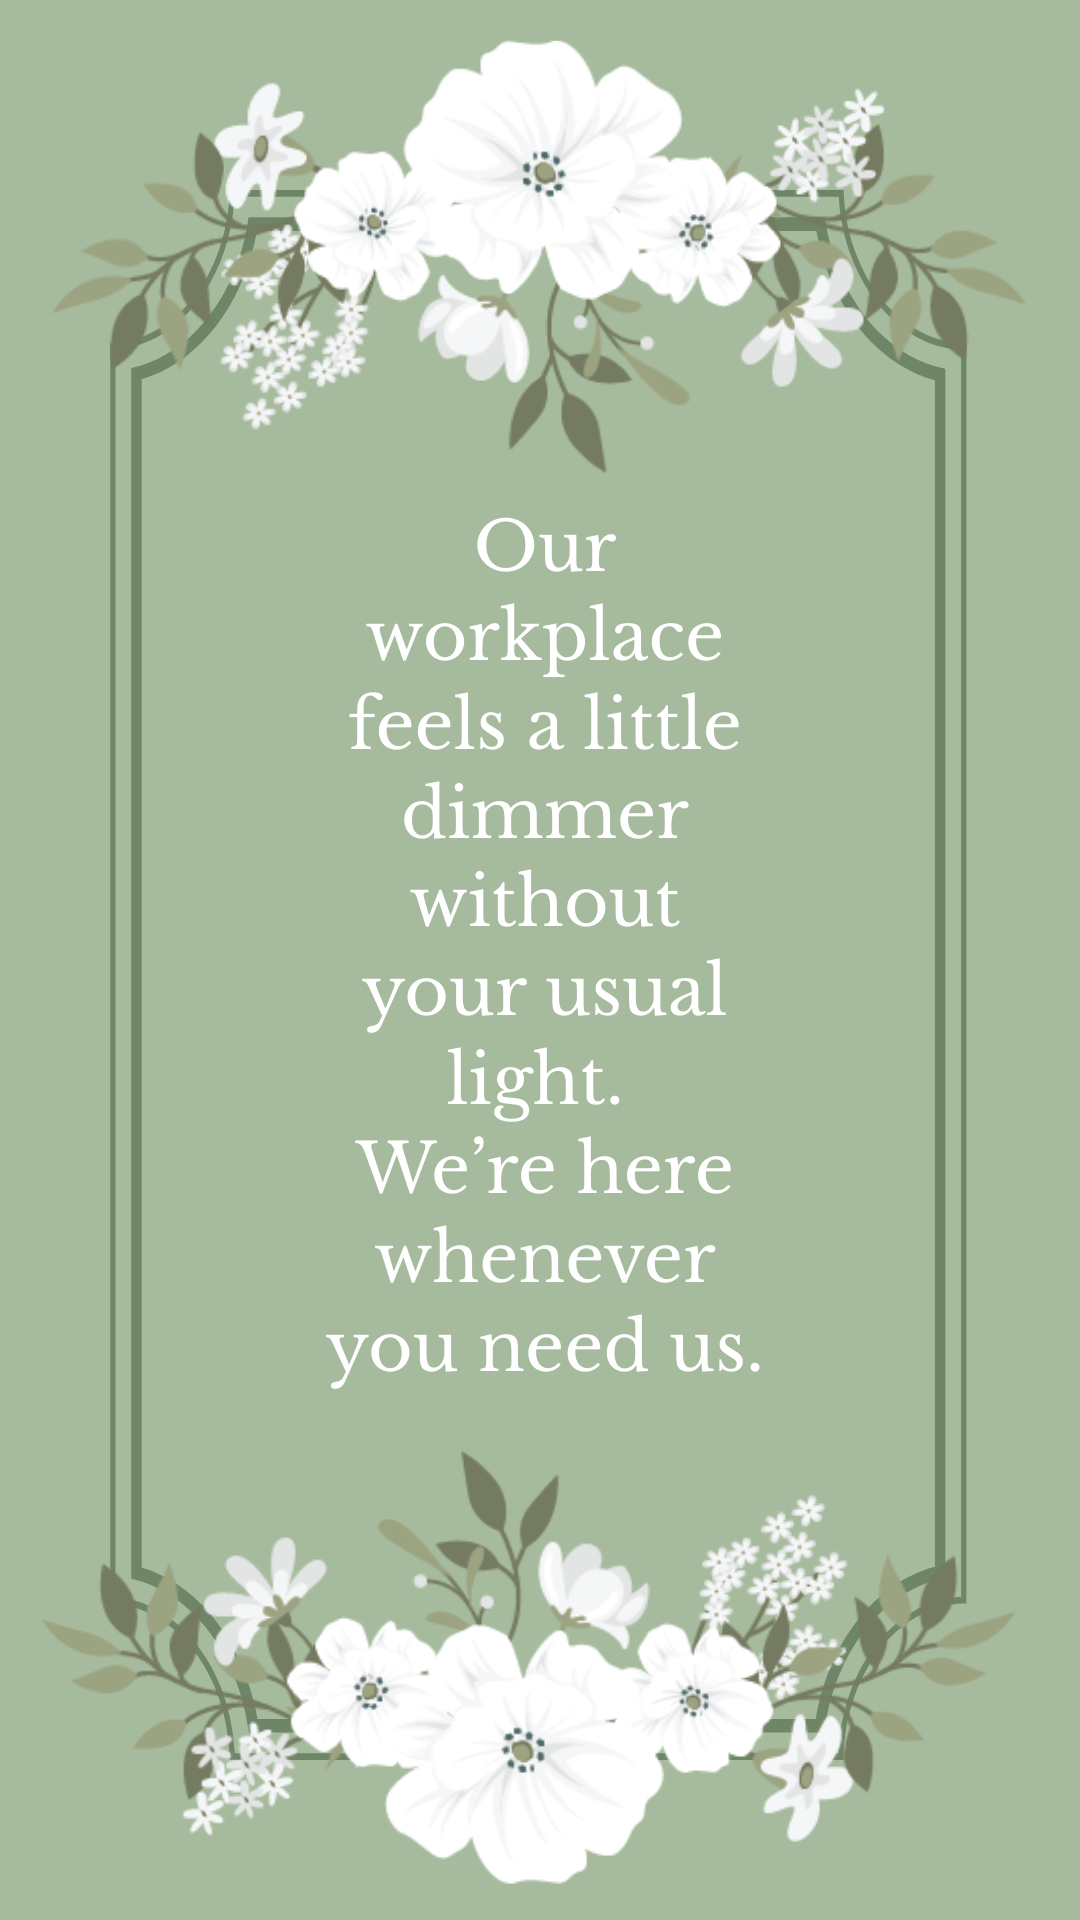 Coworker Sympathy Message Template